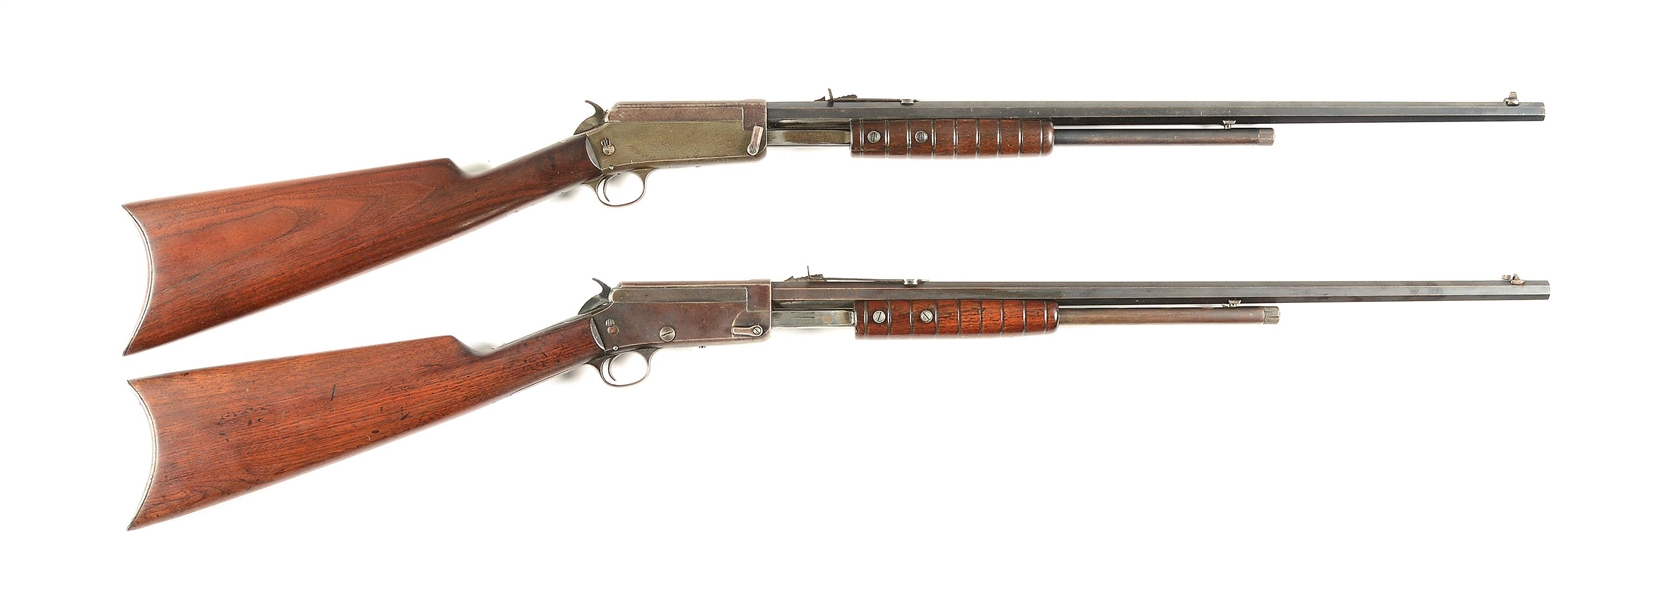 (C) LOT OF 2: MARLIN NUMBER 27 AND 27-S SLIDE ACTION RIFLES.